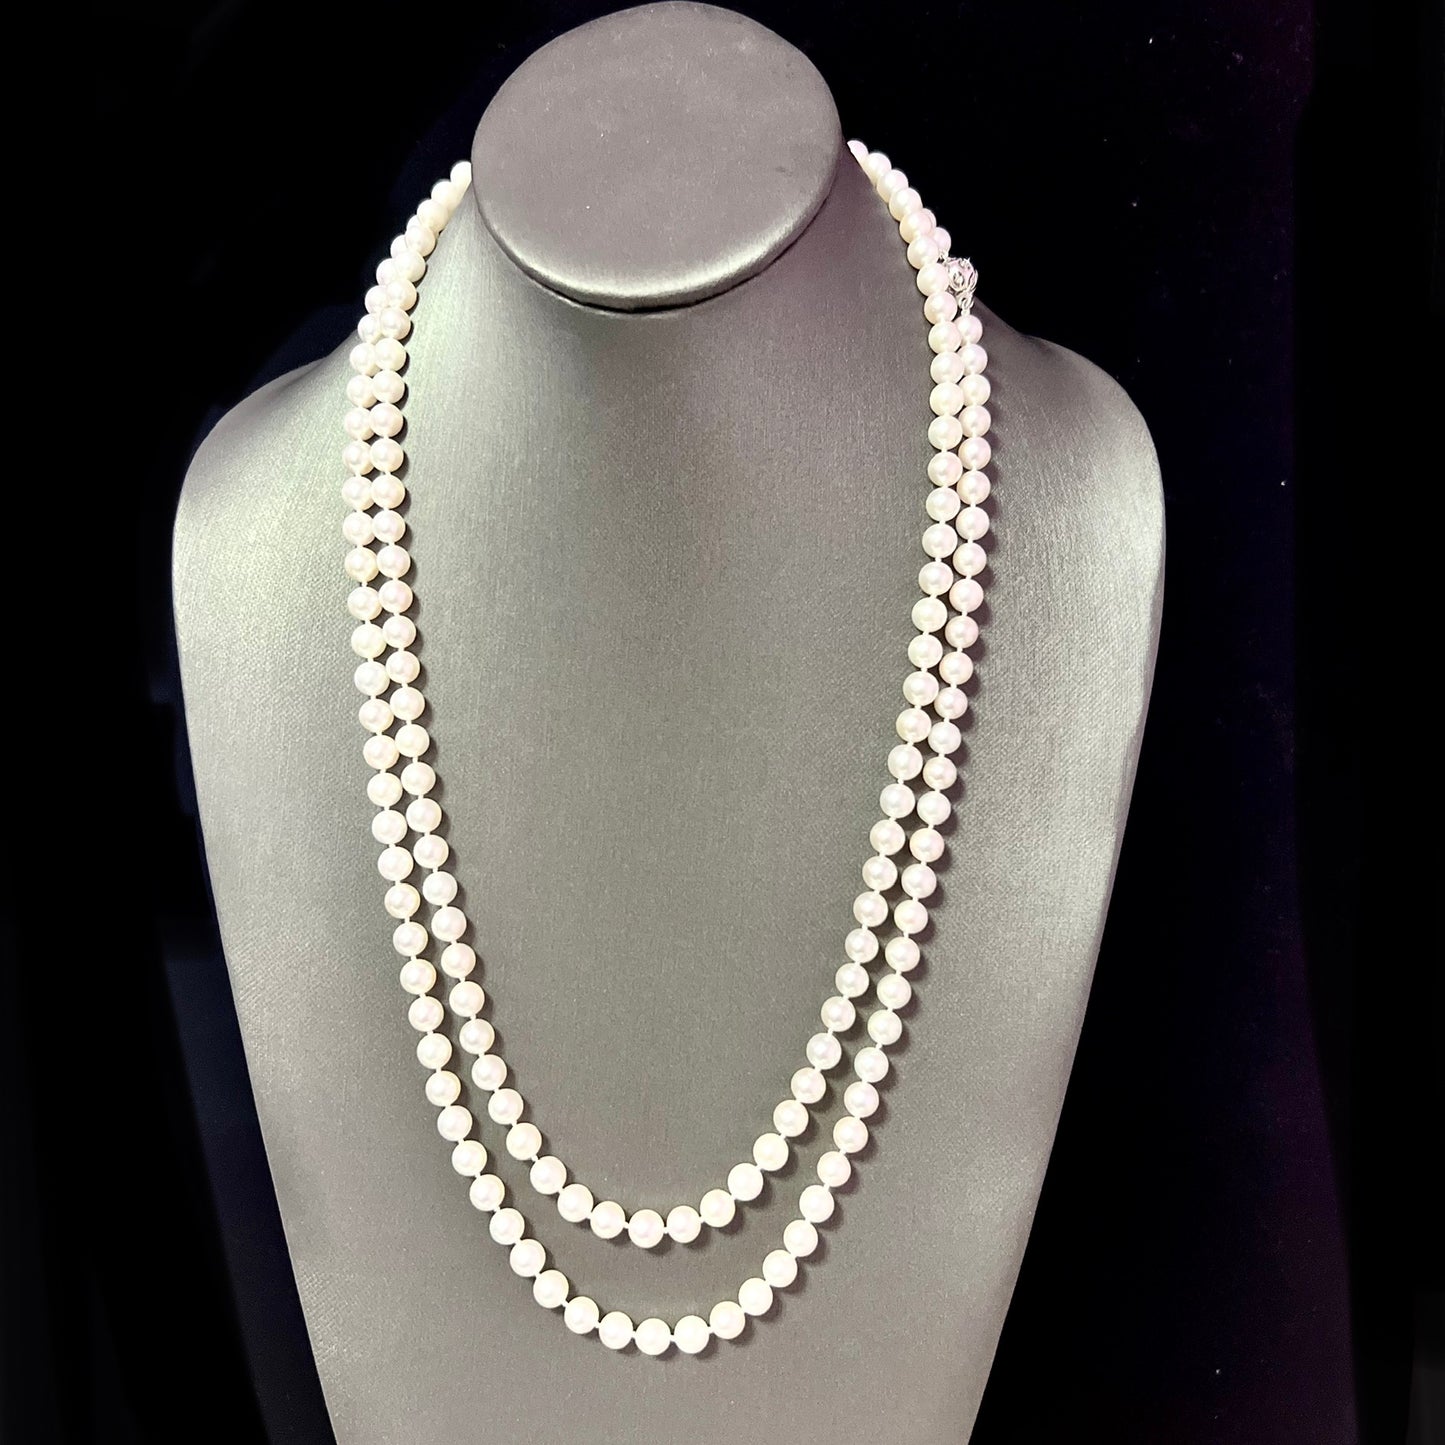 Natural Akoya Pearl Diamond Necklace 49" 18k White Gold 7 mm Certified $5,950 307927 - Certified Fine Jewelry